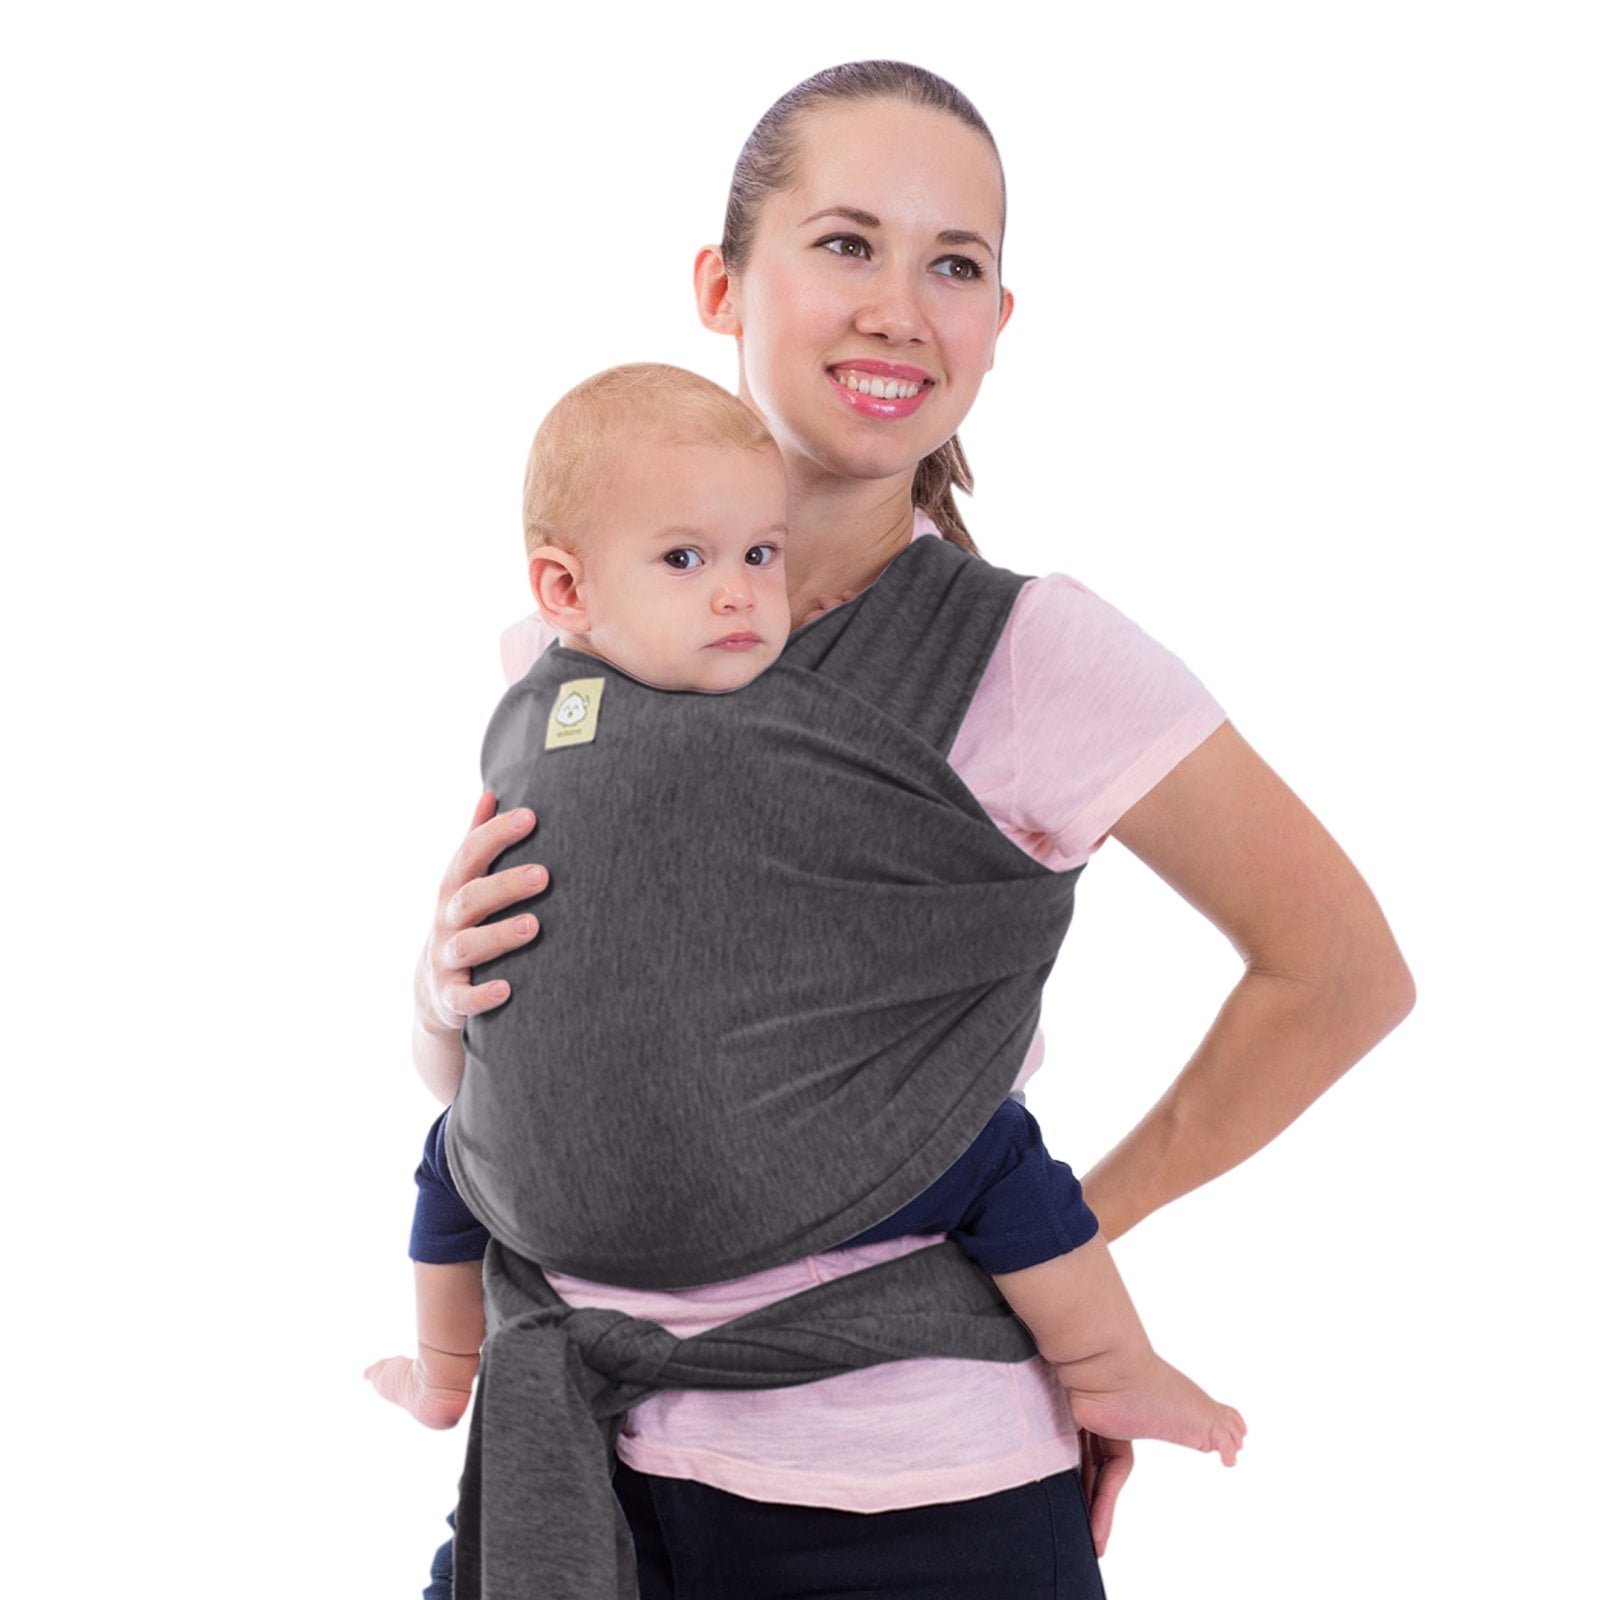 All-in-1 Baby Wrap Carrier by KeaBabies 